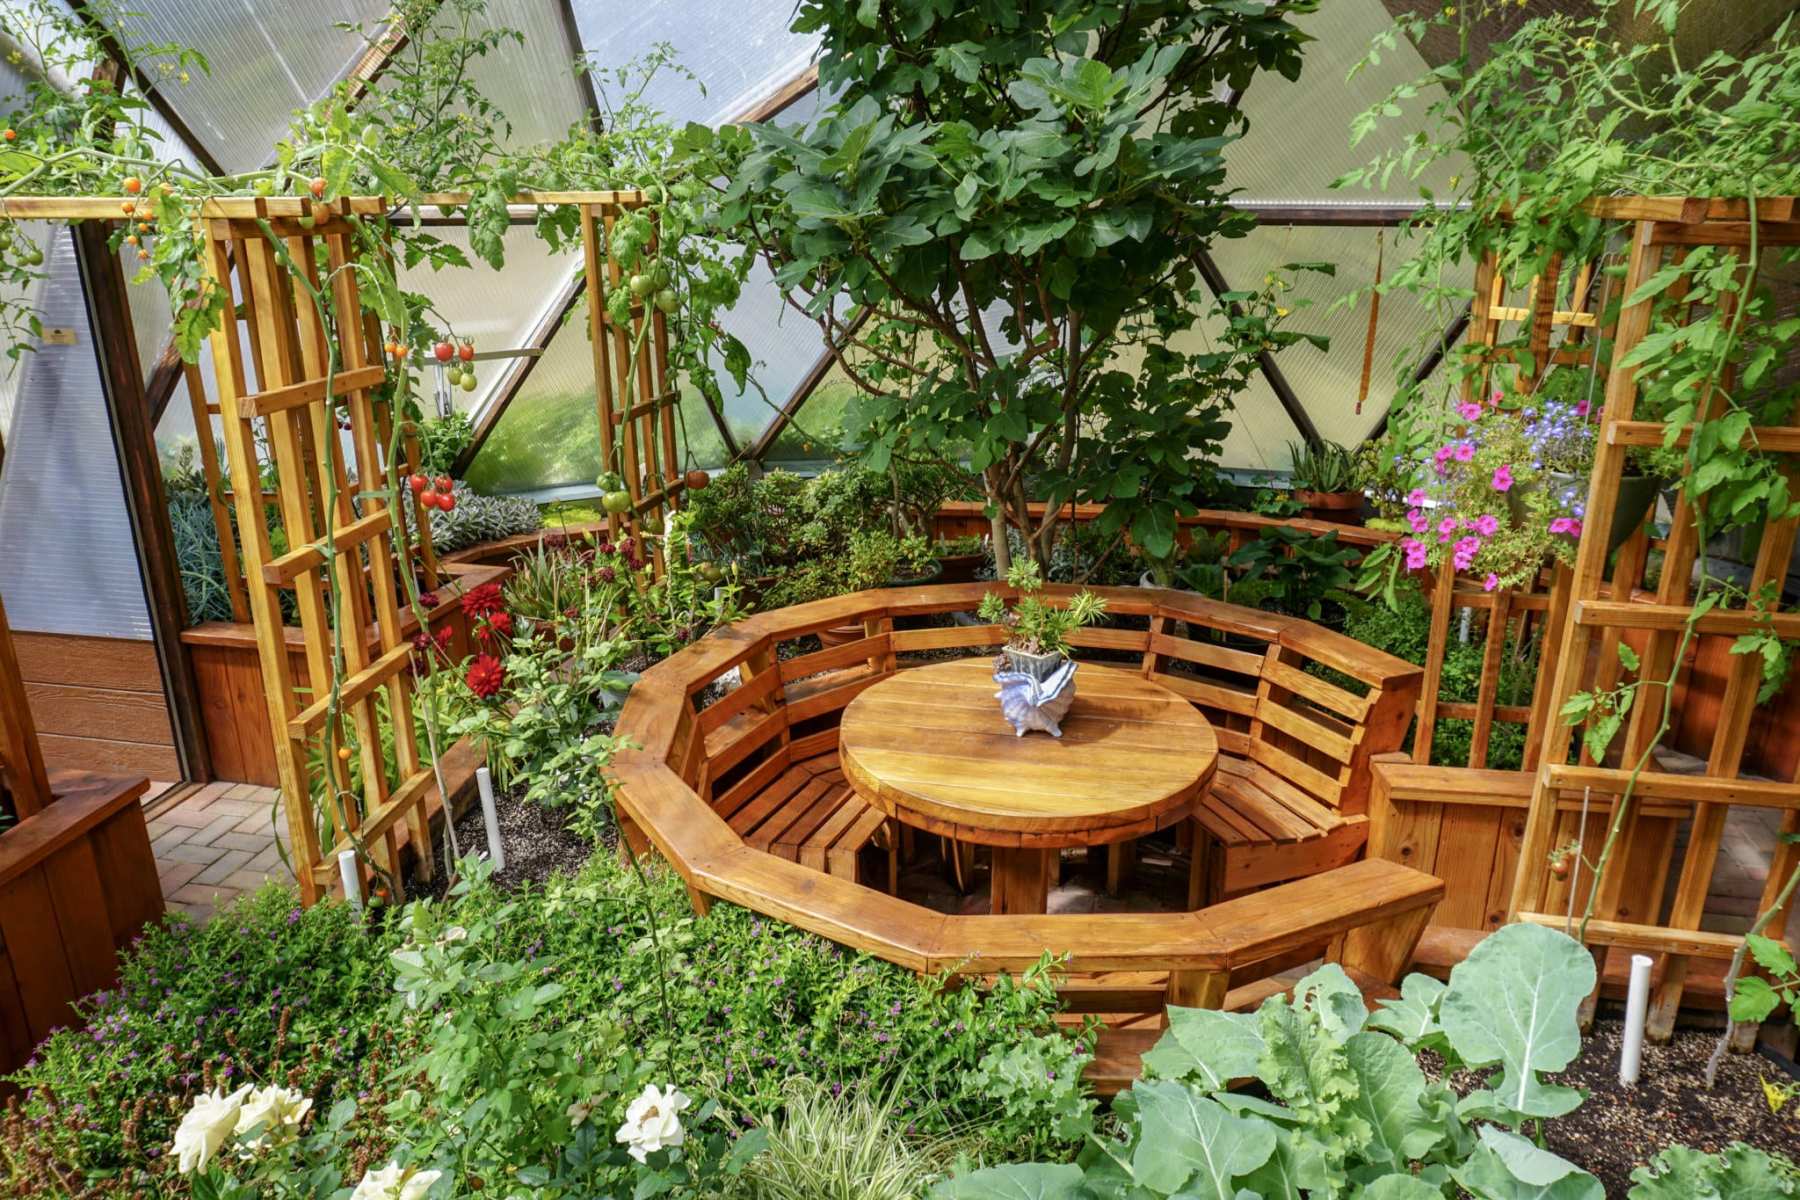 Beautiful table inside Growing Dome Greenhouse